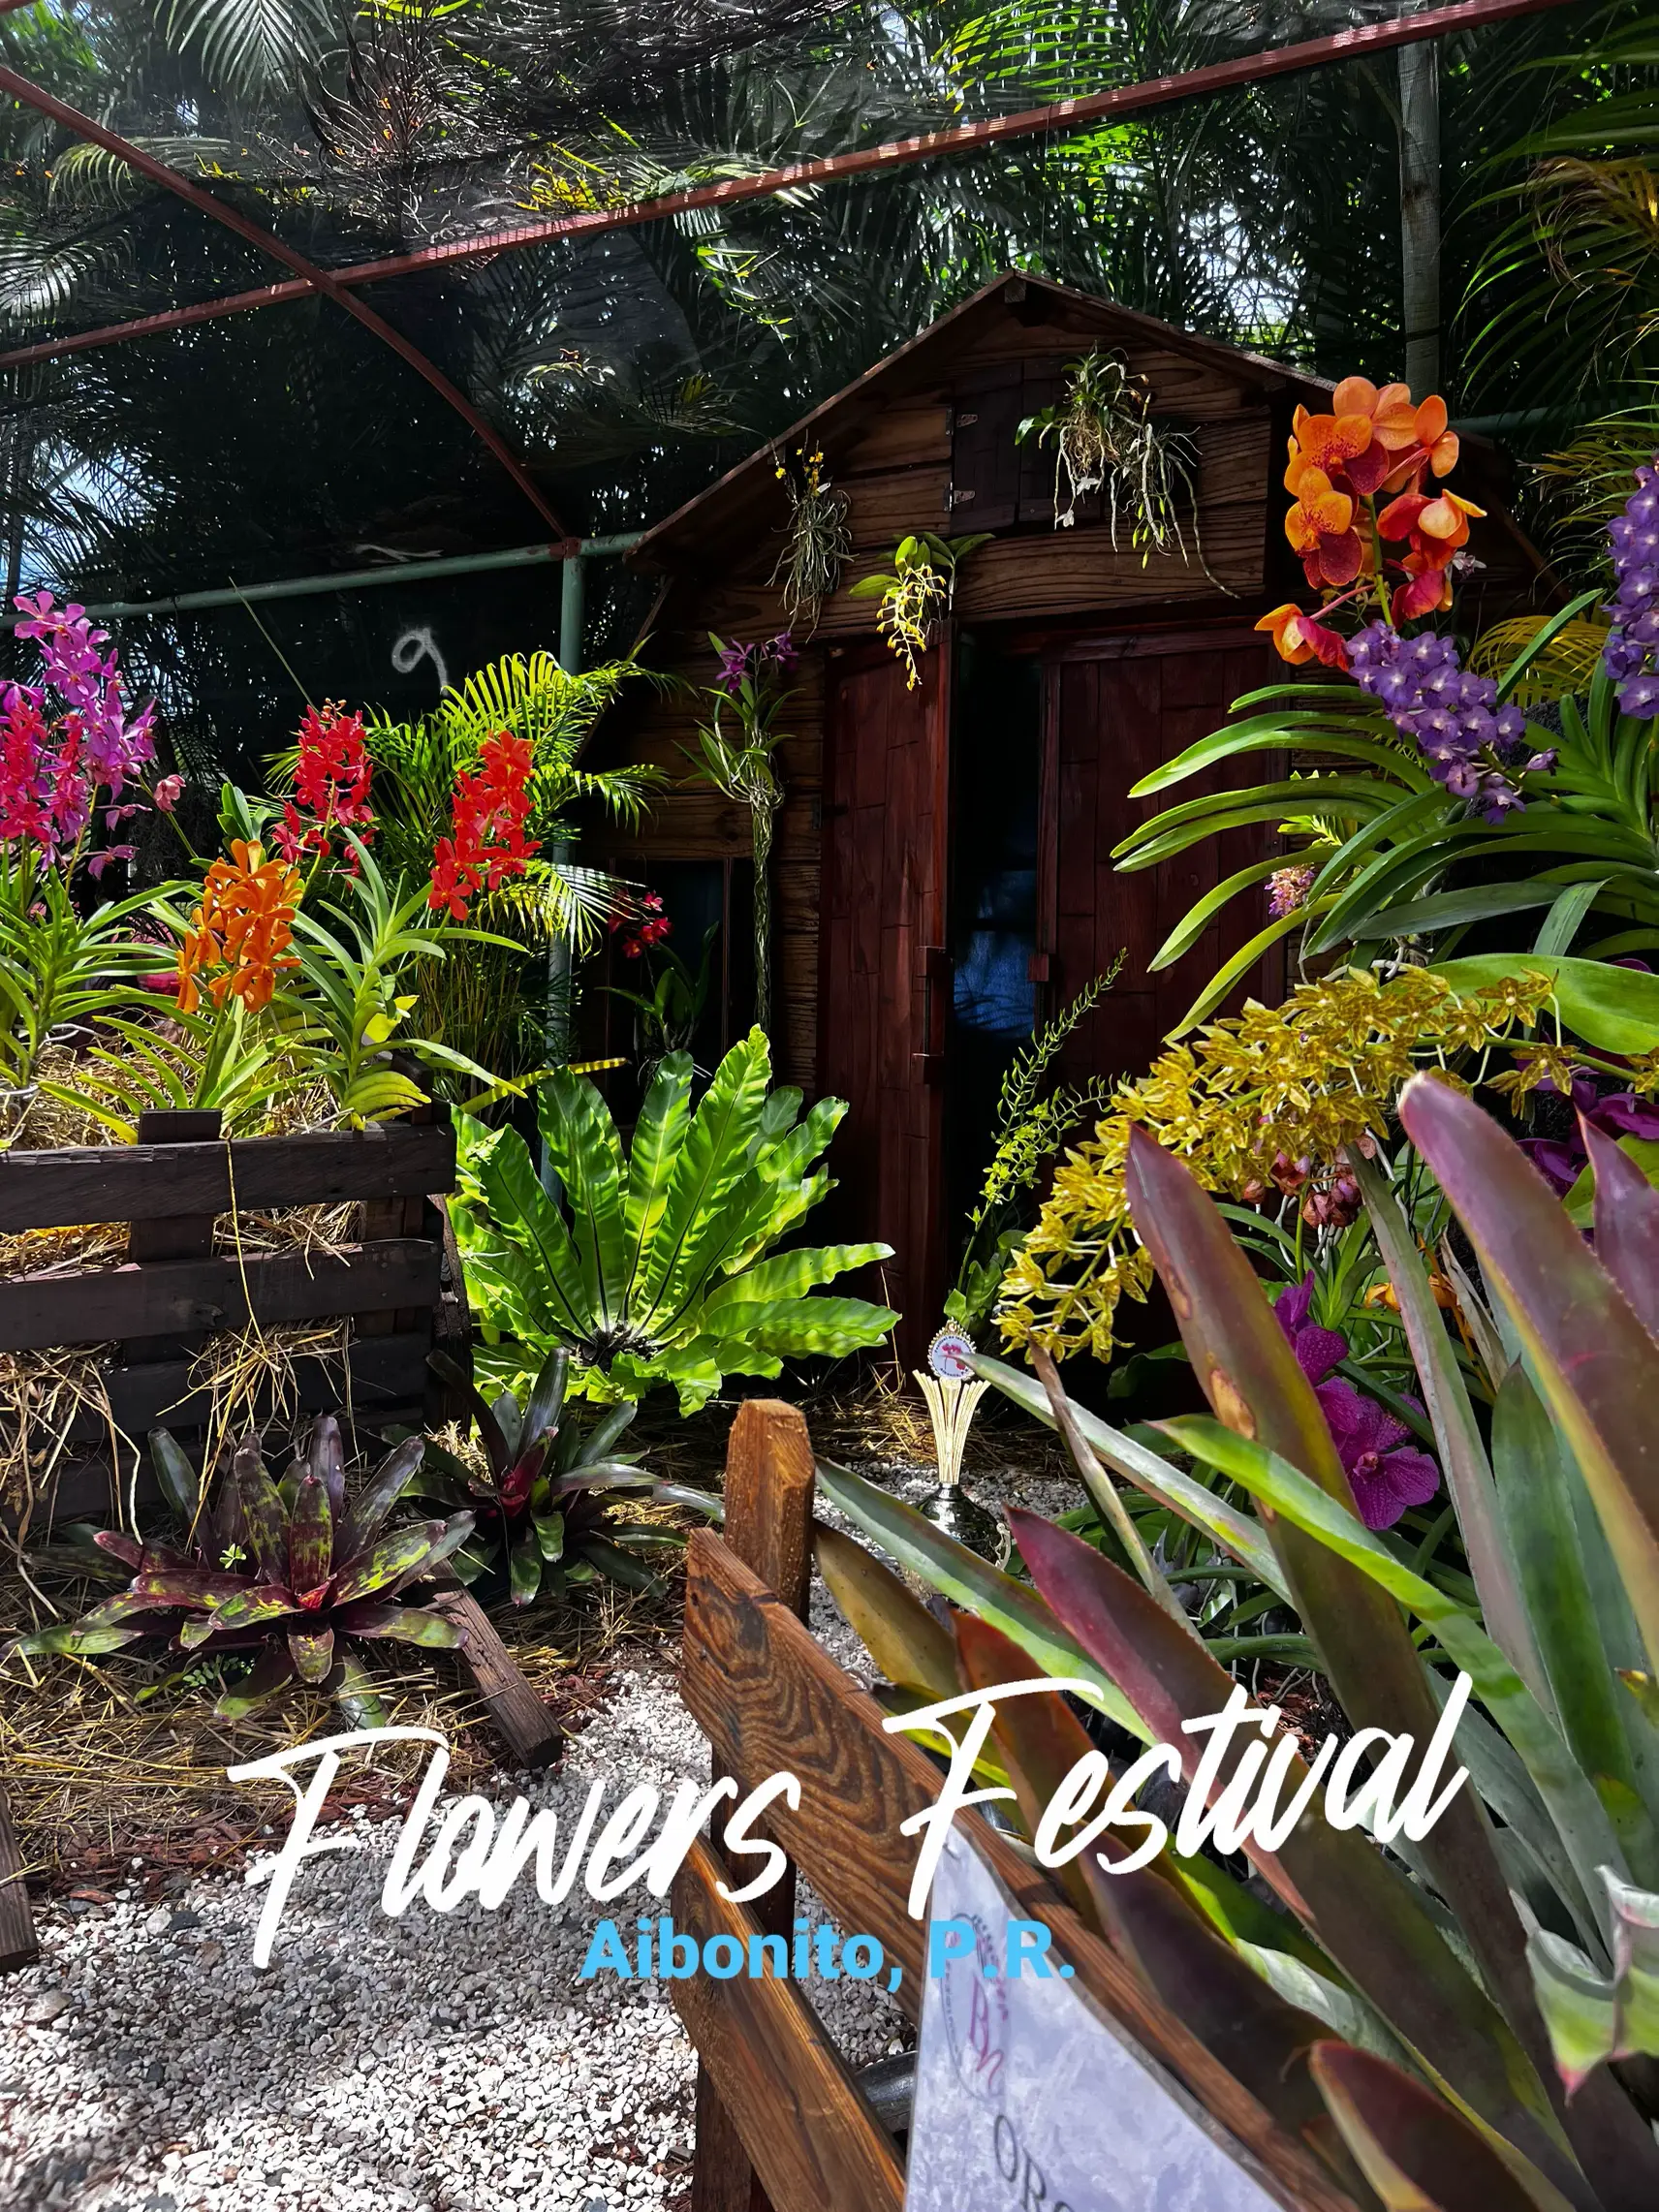 Flowers Festival Gallery Posted By